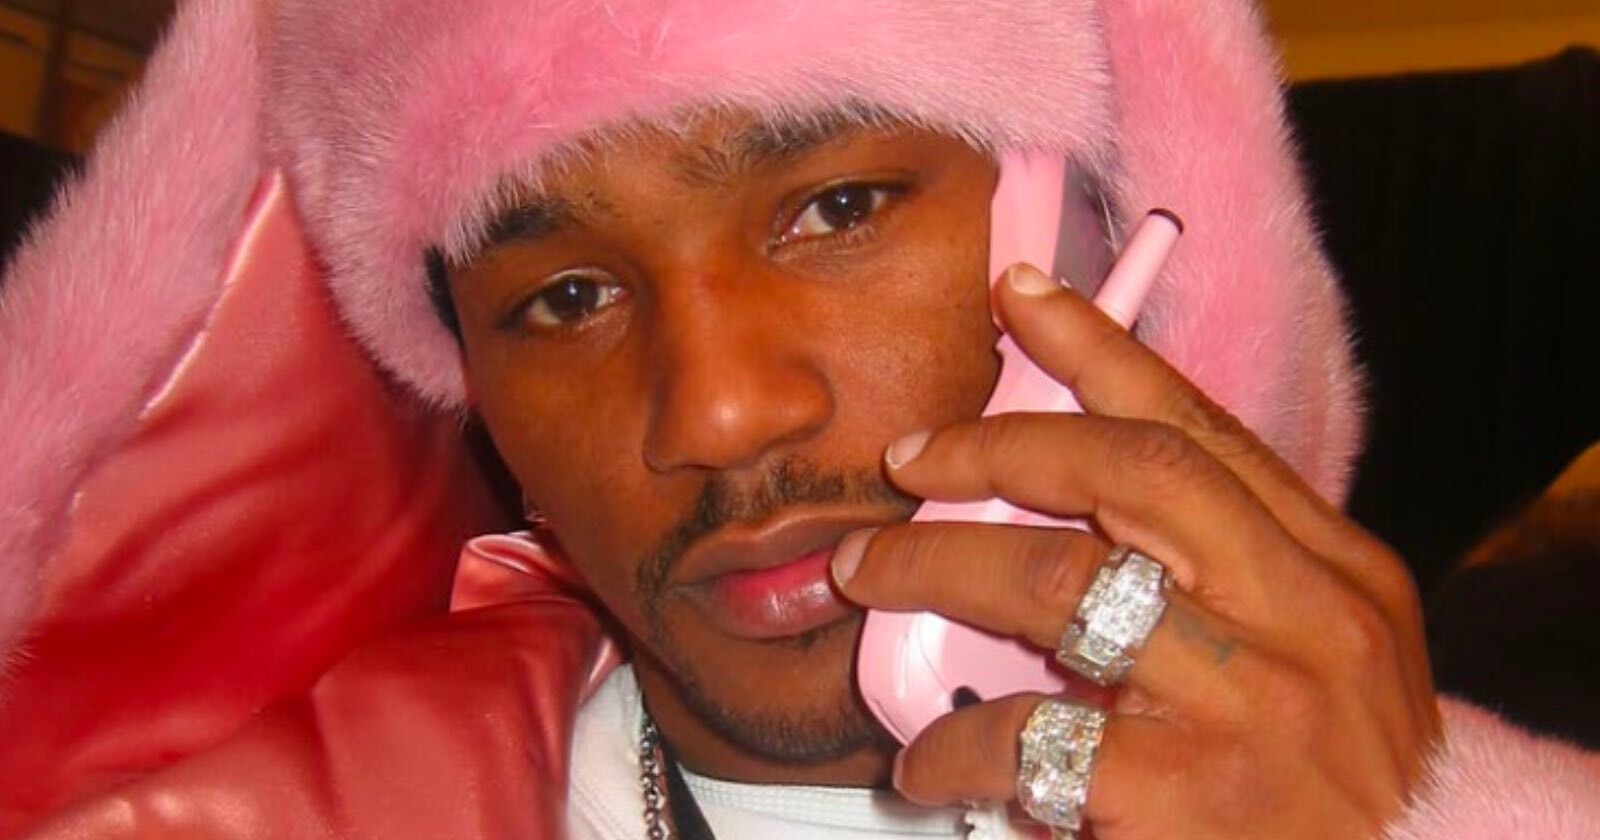  rapper cam ron sued using iconic photo 